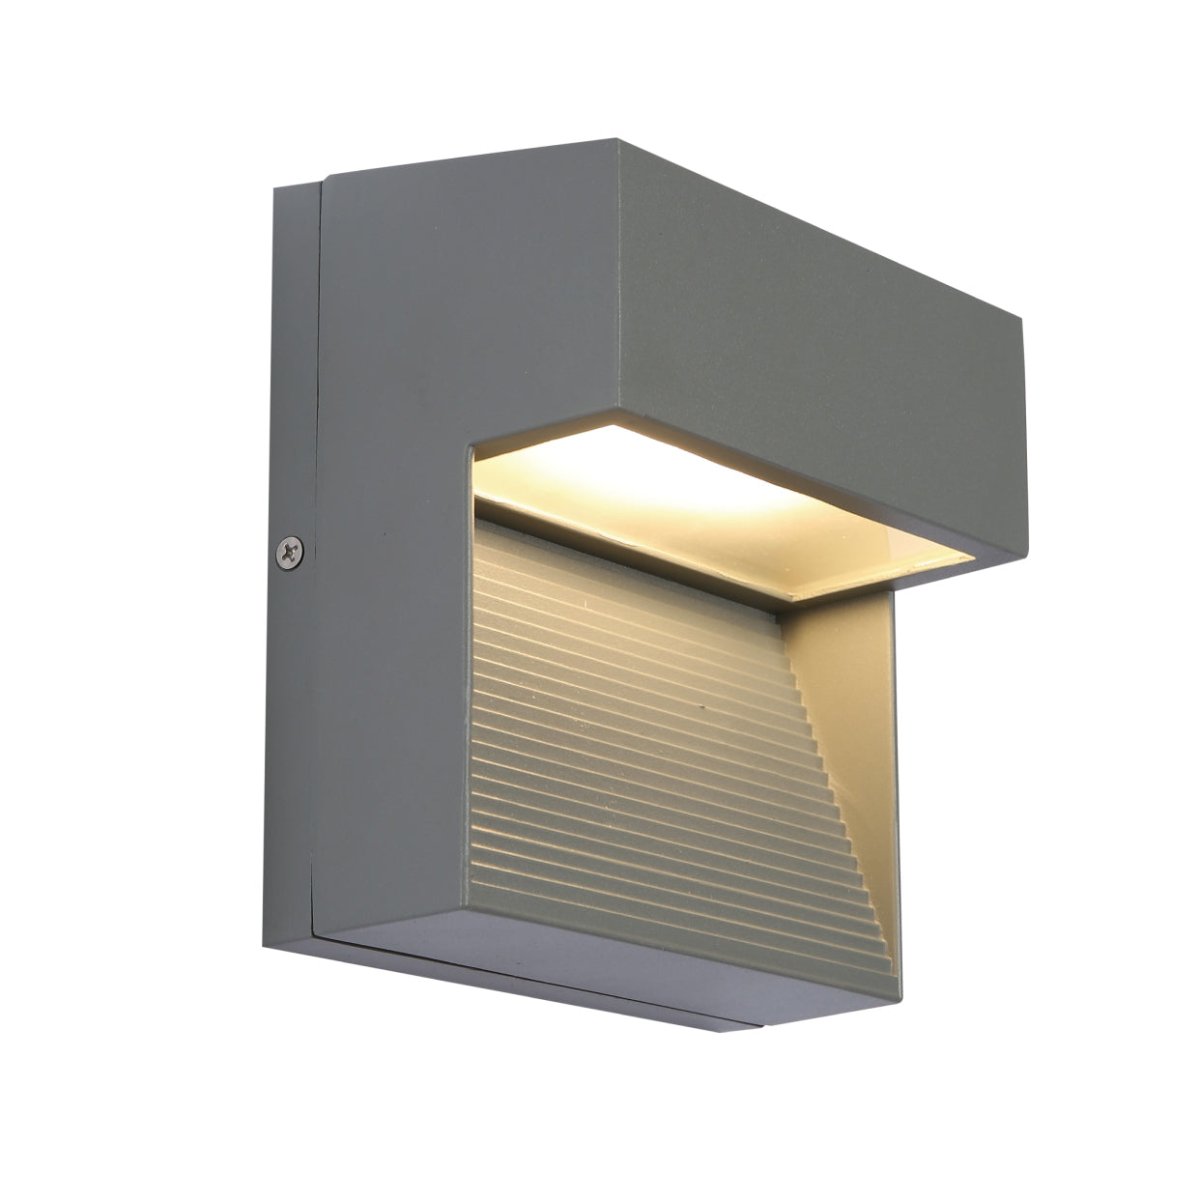 Main image of LED Diecast Aluminium Stair and Wall Light 5W Warm White 3000K IP54 Grey | TEKLED 182-03344 on version